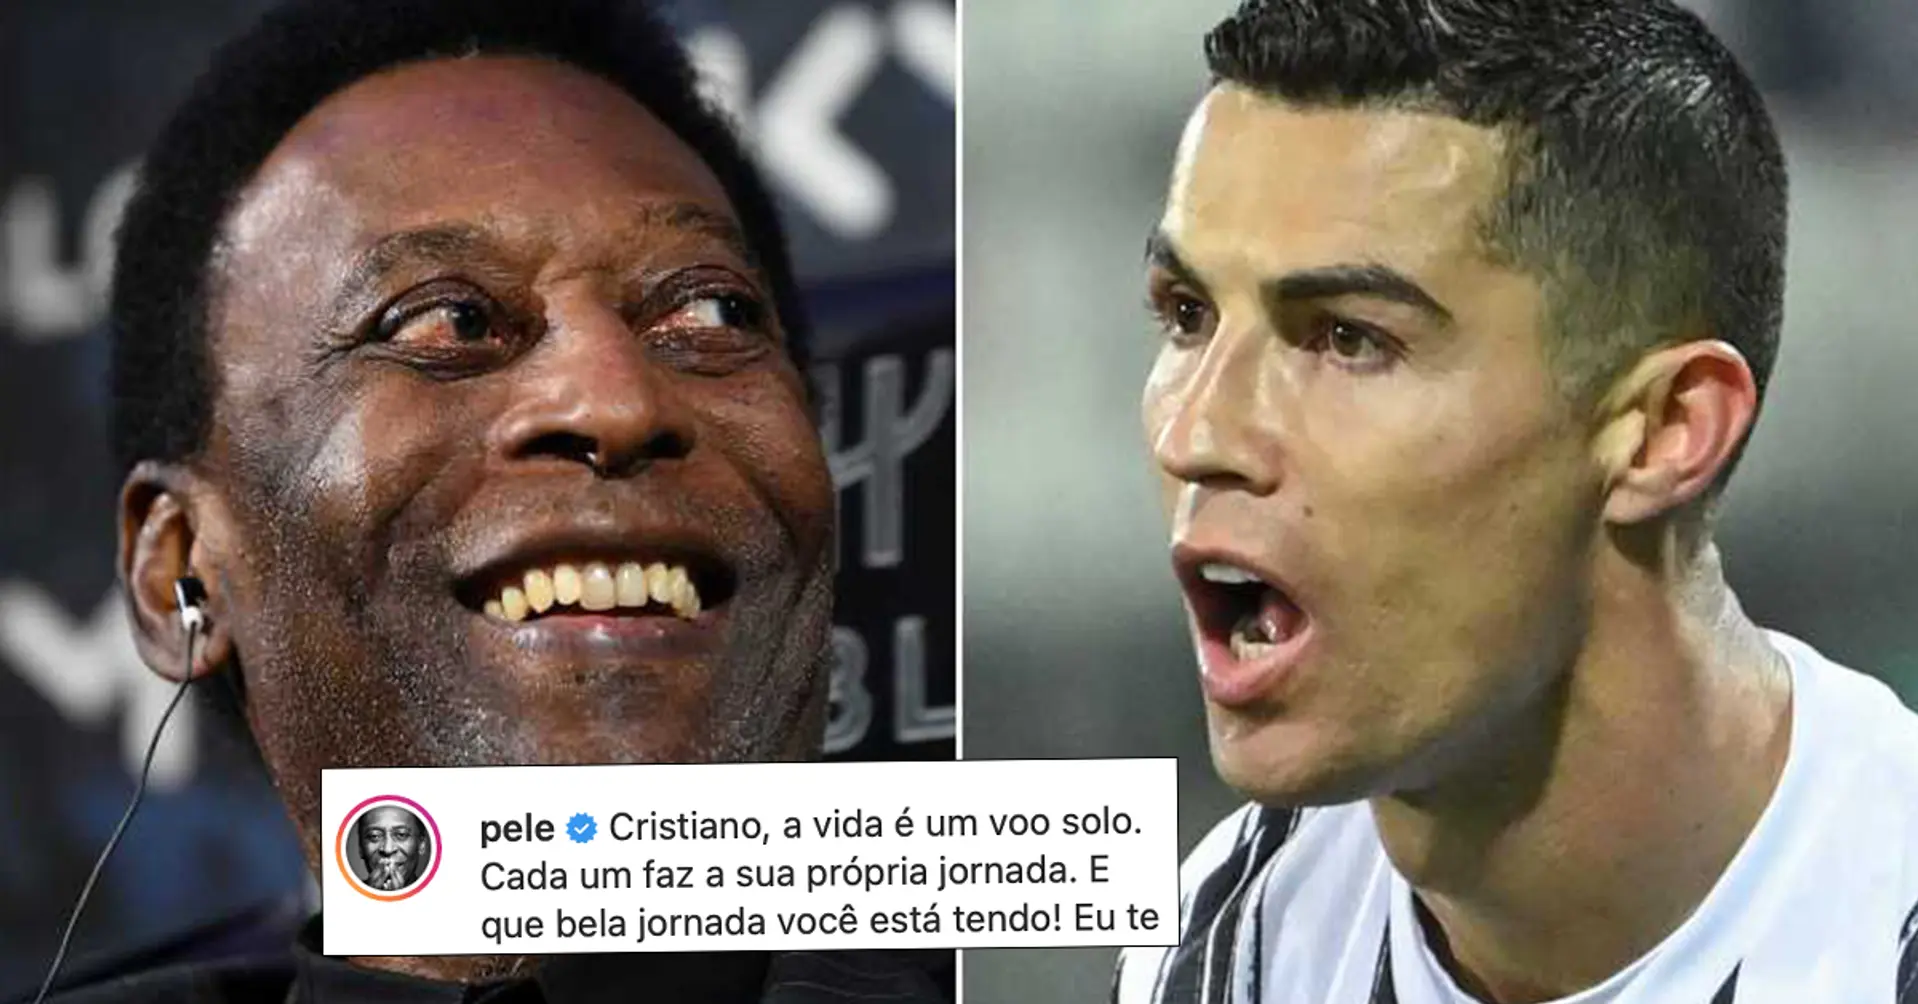 'My only regret is not being able to give you a hug today': Pele responds after Ronaldo breaks his scoring record